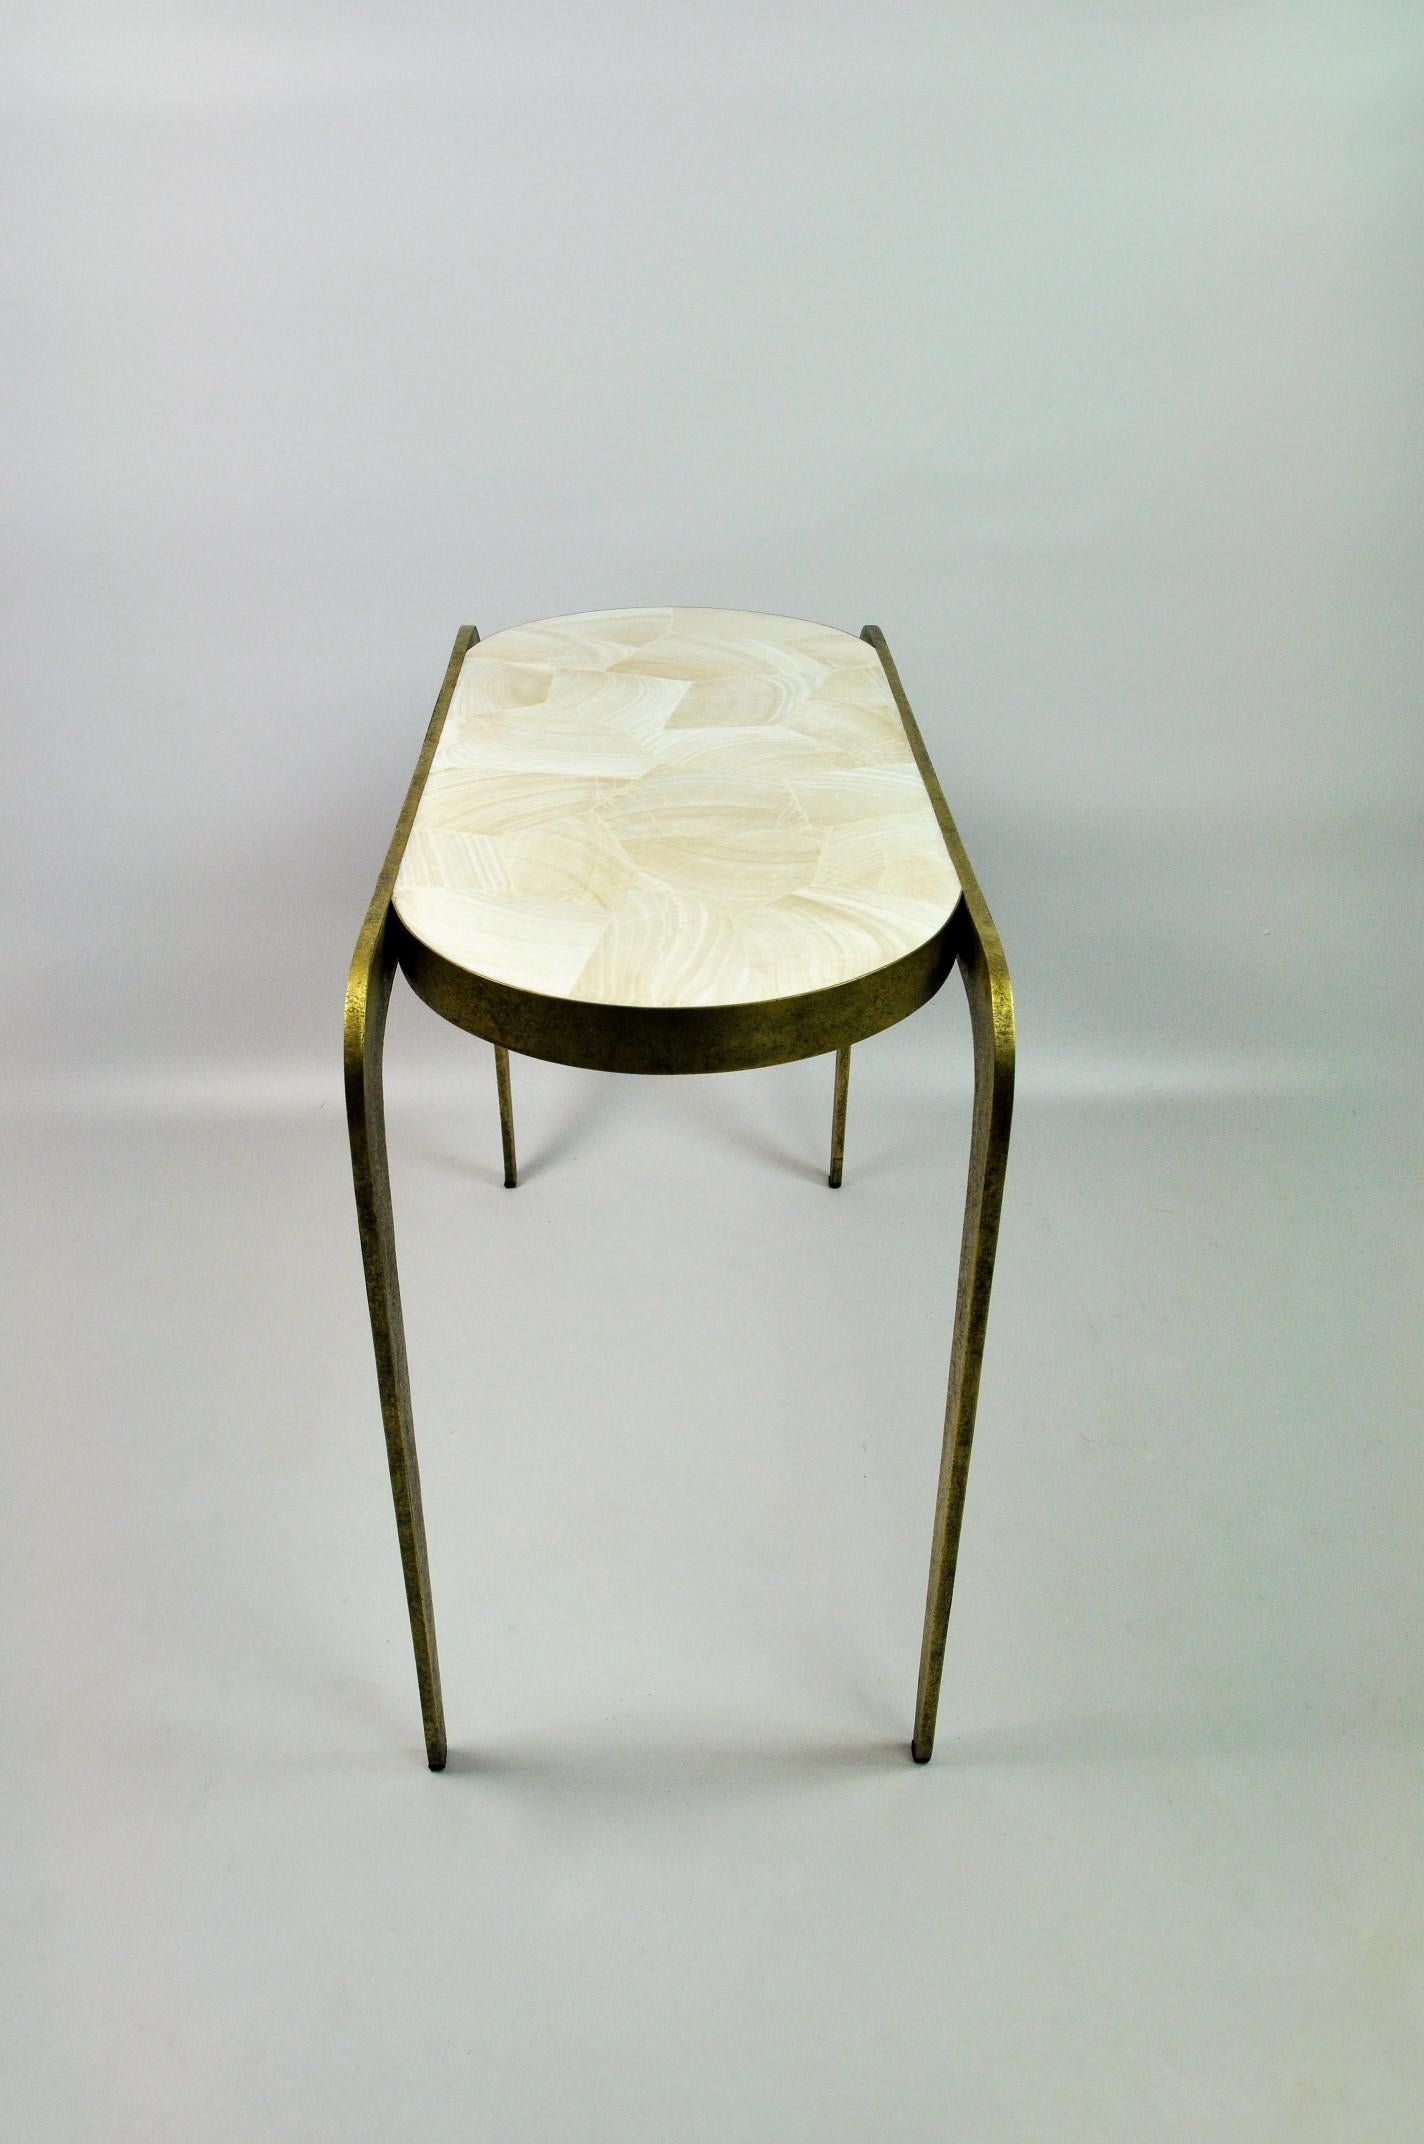 The Visio side table by Ginger Brown is made of brass with a polished giant clam fossil marquetry top.
The brass is hammered by hand and gives an unique texture while contrasting with the white giant clam fossil.
This beautiful table will match